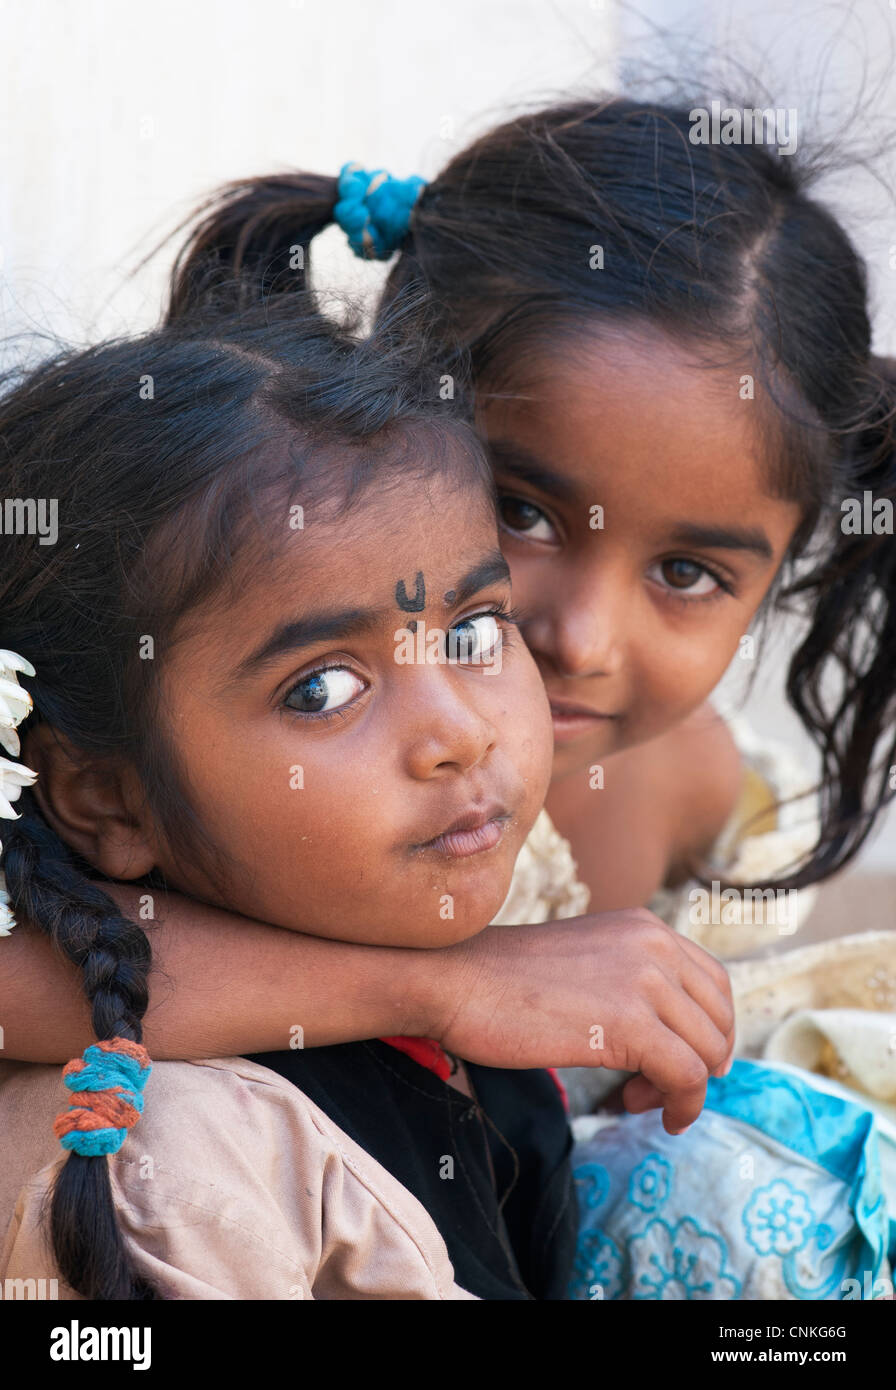 Young poor lower caste Indian street girls smiling Stock Photo